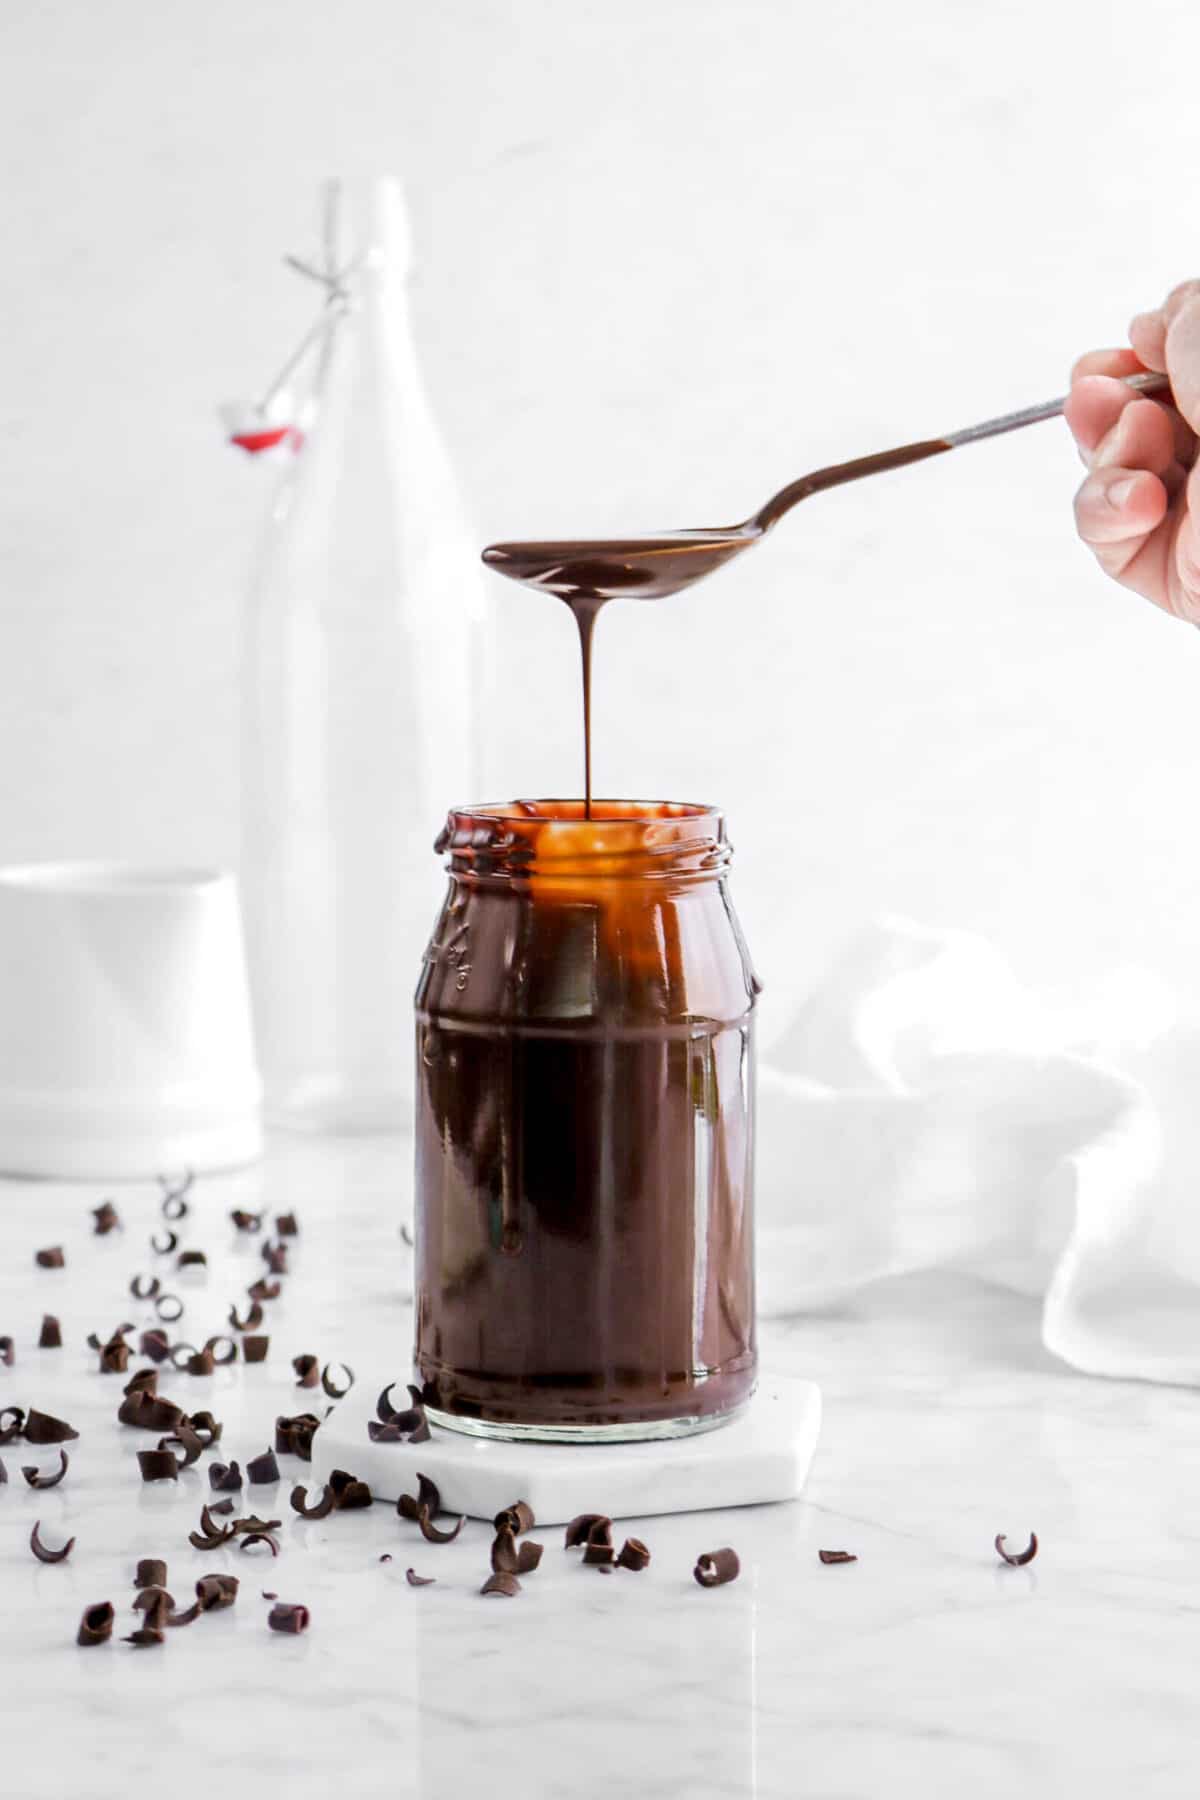 chocolate sauce with a spoon pouring sauce into the jar with chocolate curls, a white napkin, and glasses behind